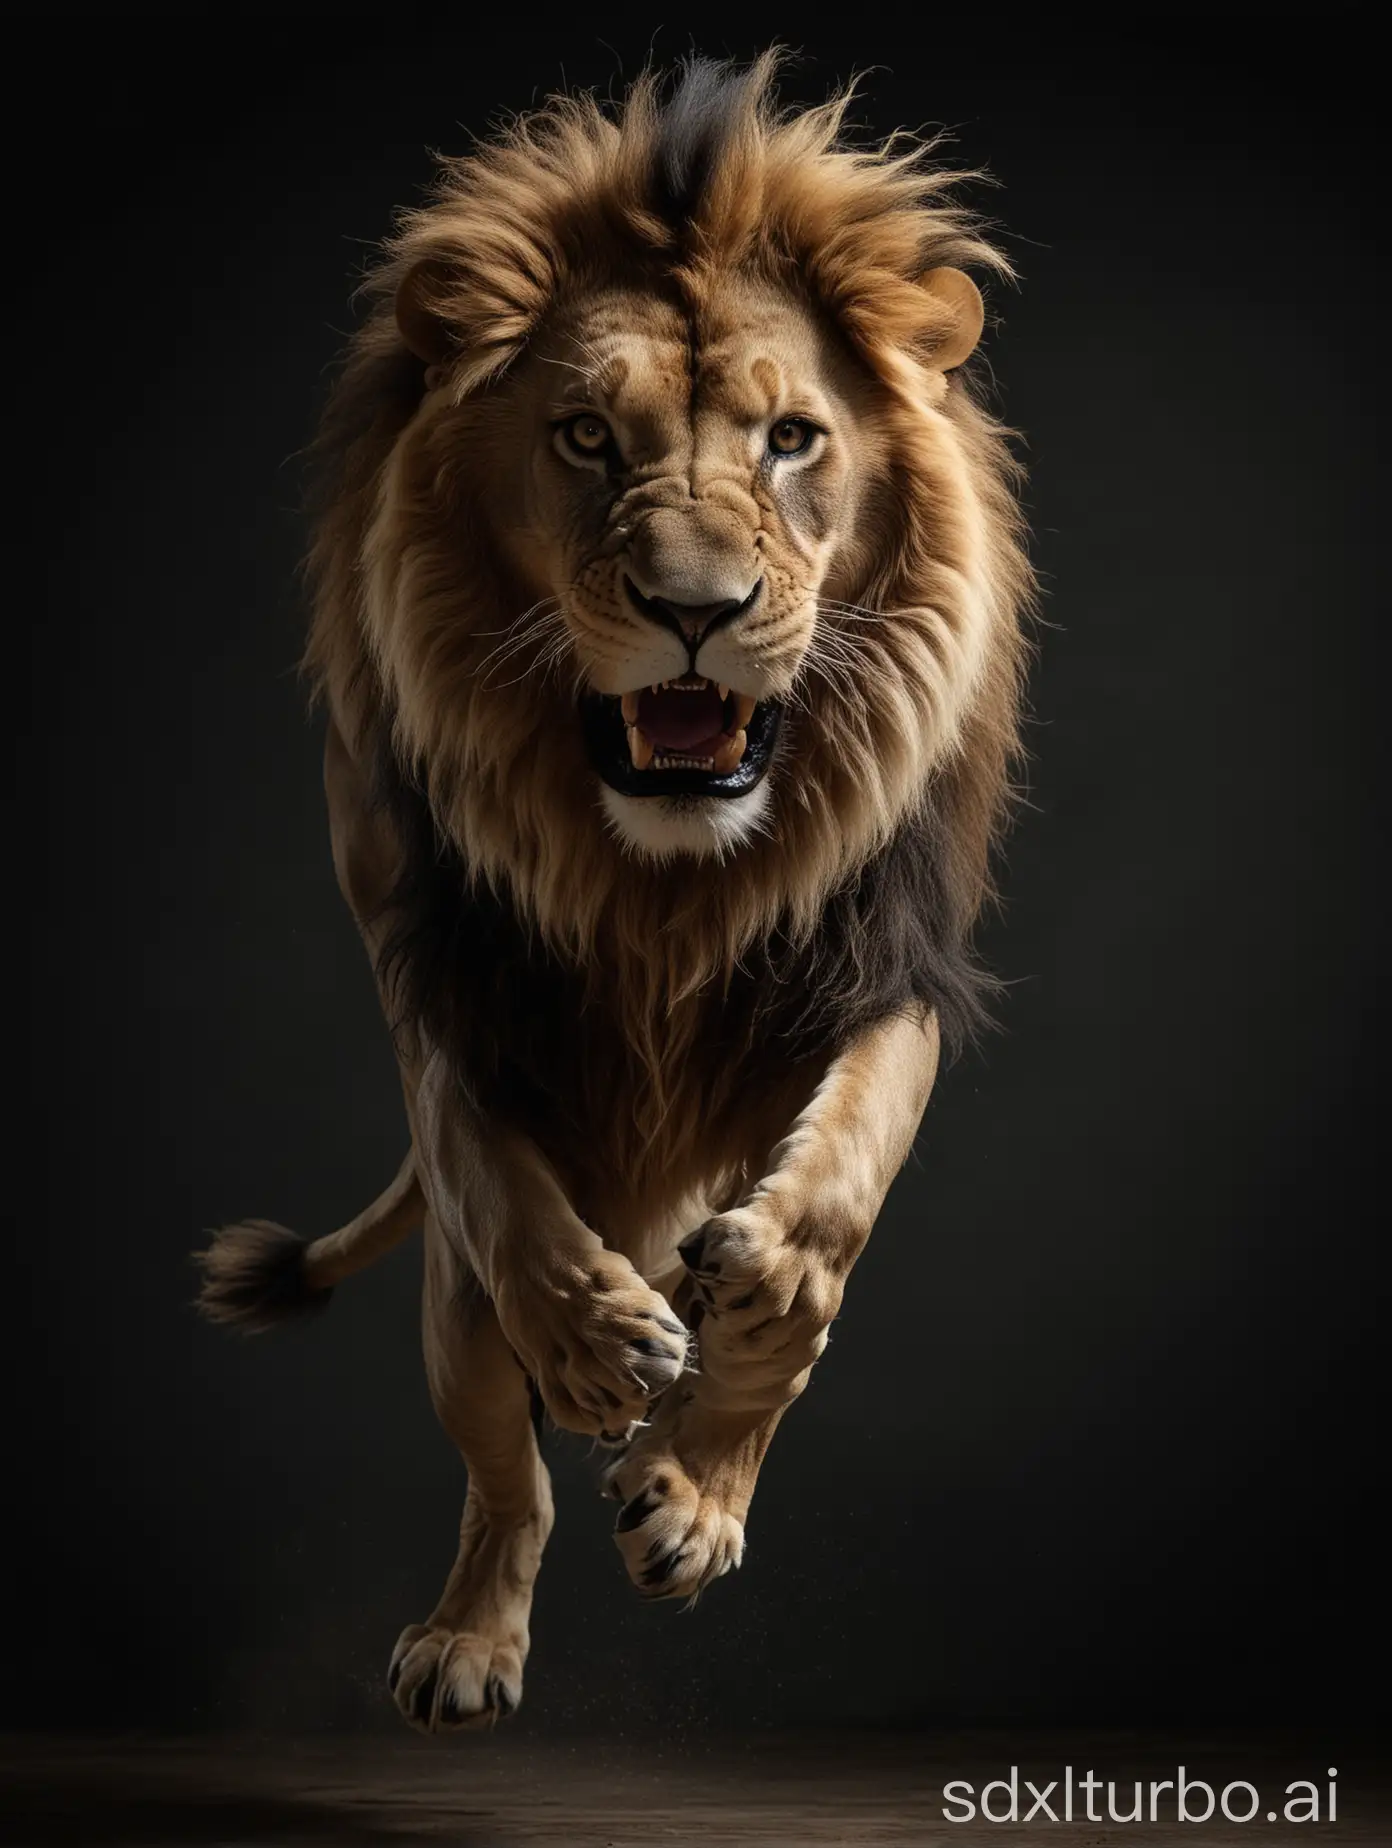 great majestic lion jumping roaring directly at the camera, in a photography studio with dark background, very detailed, ultra-high resolution